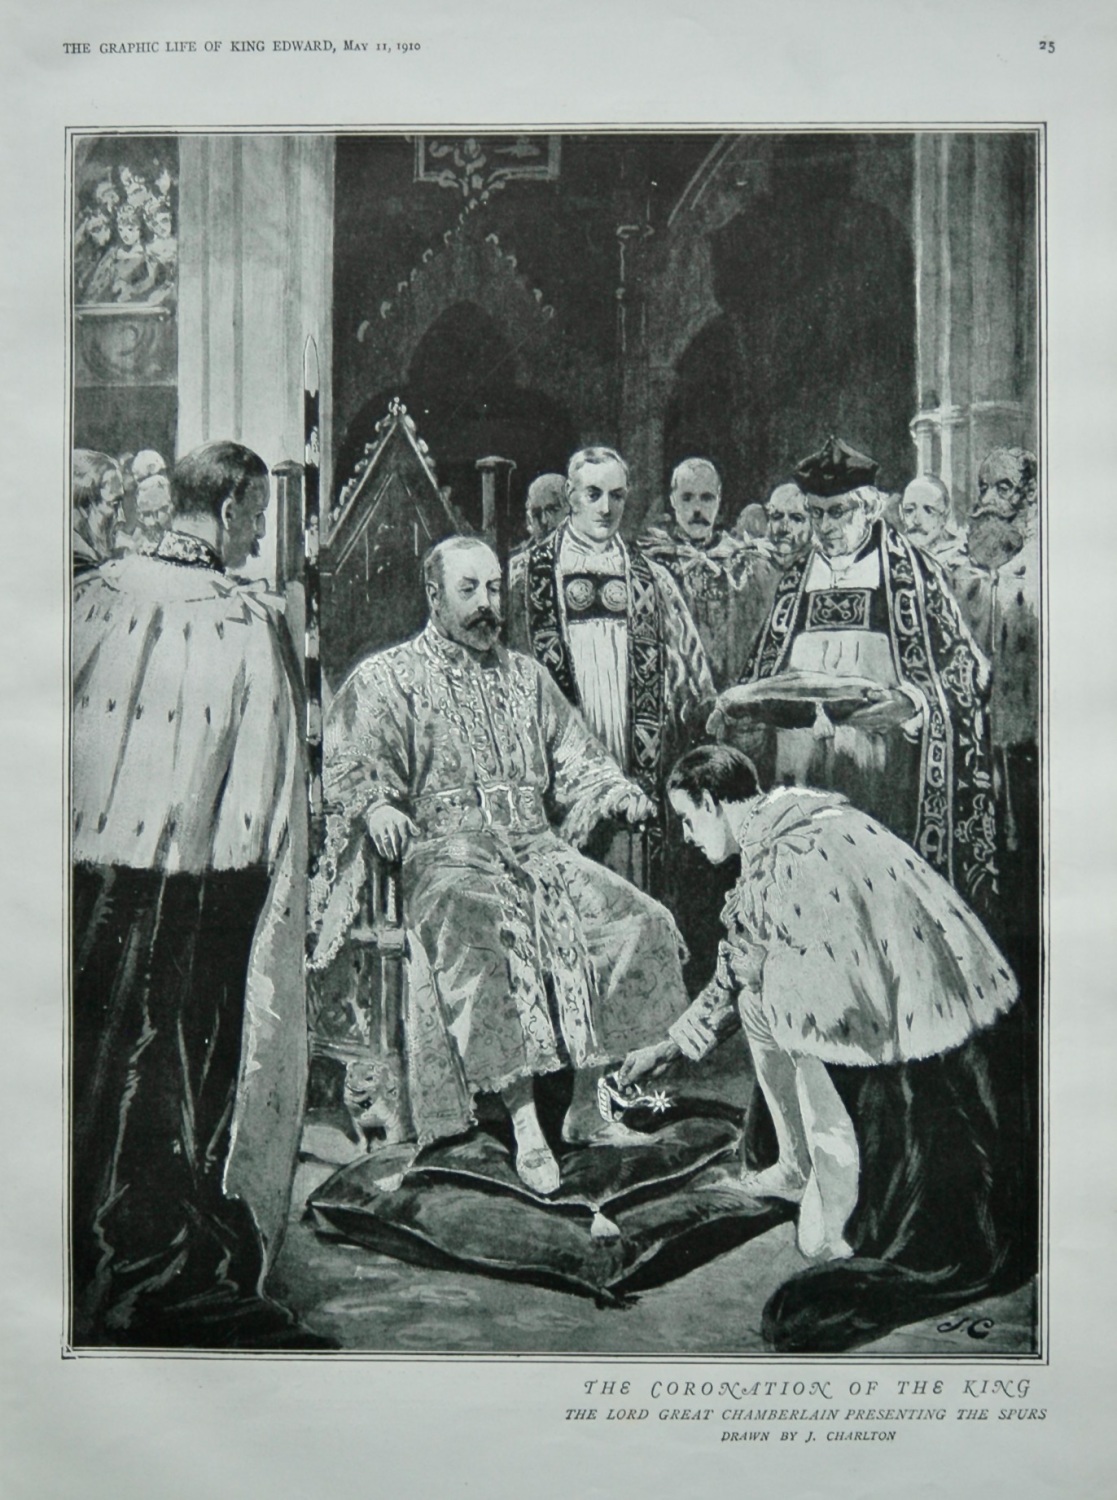 Coronation of the King : The Lord Great Chamberlain Presenting the Spurs.  